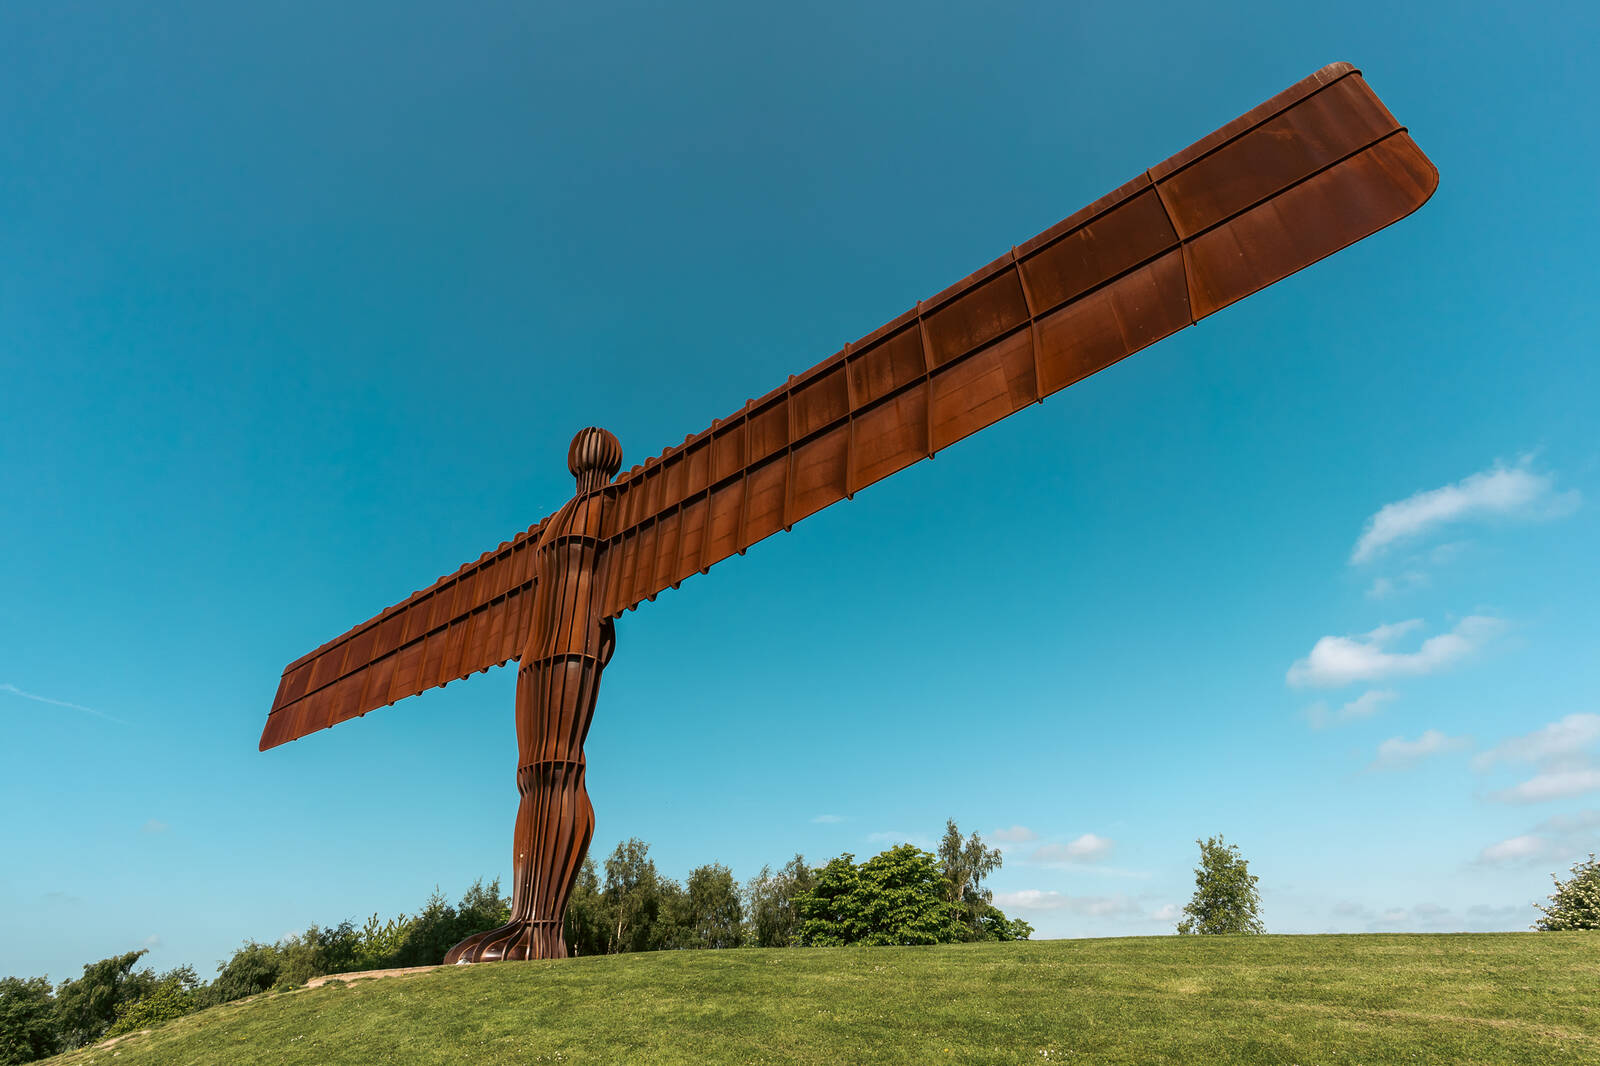 Image of Angel of the North by James Billings.